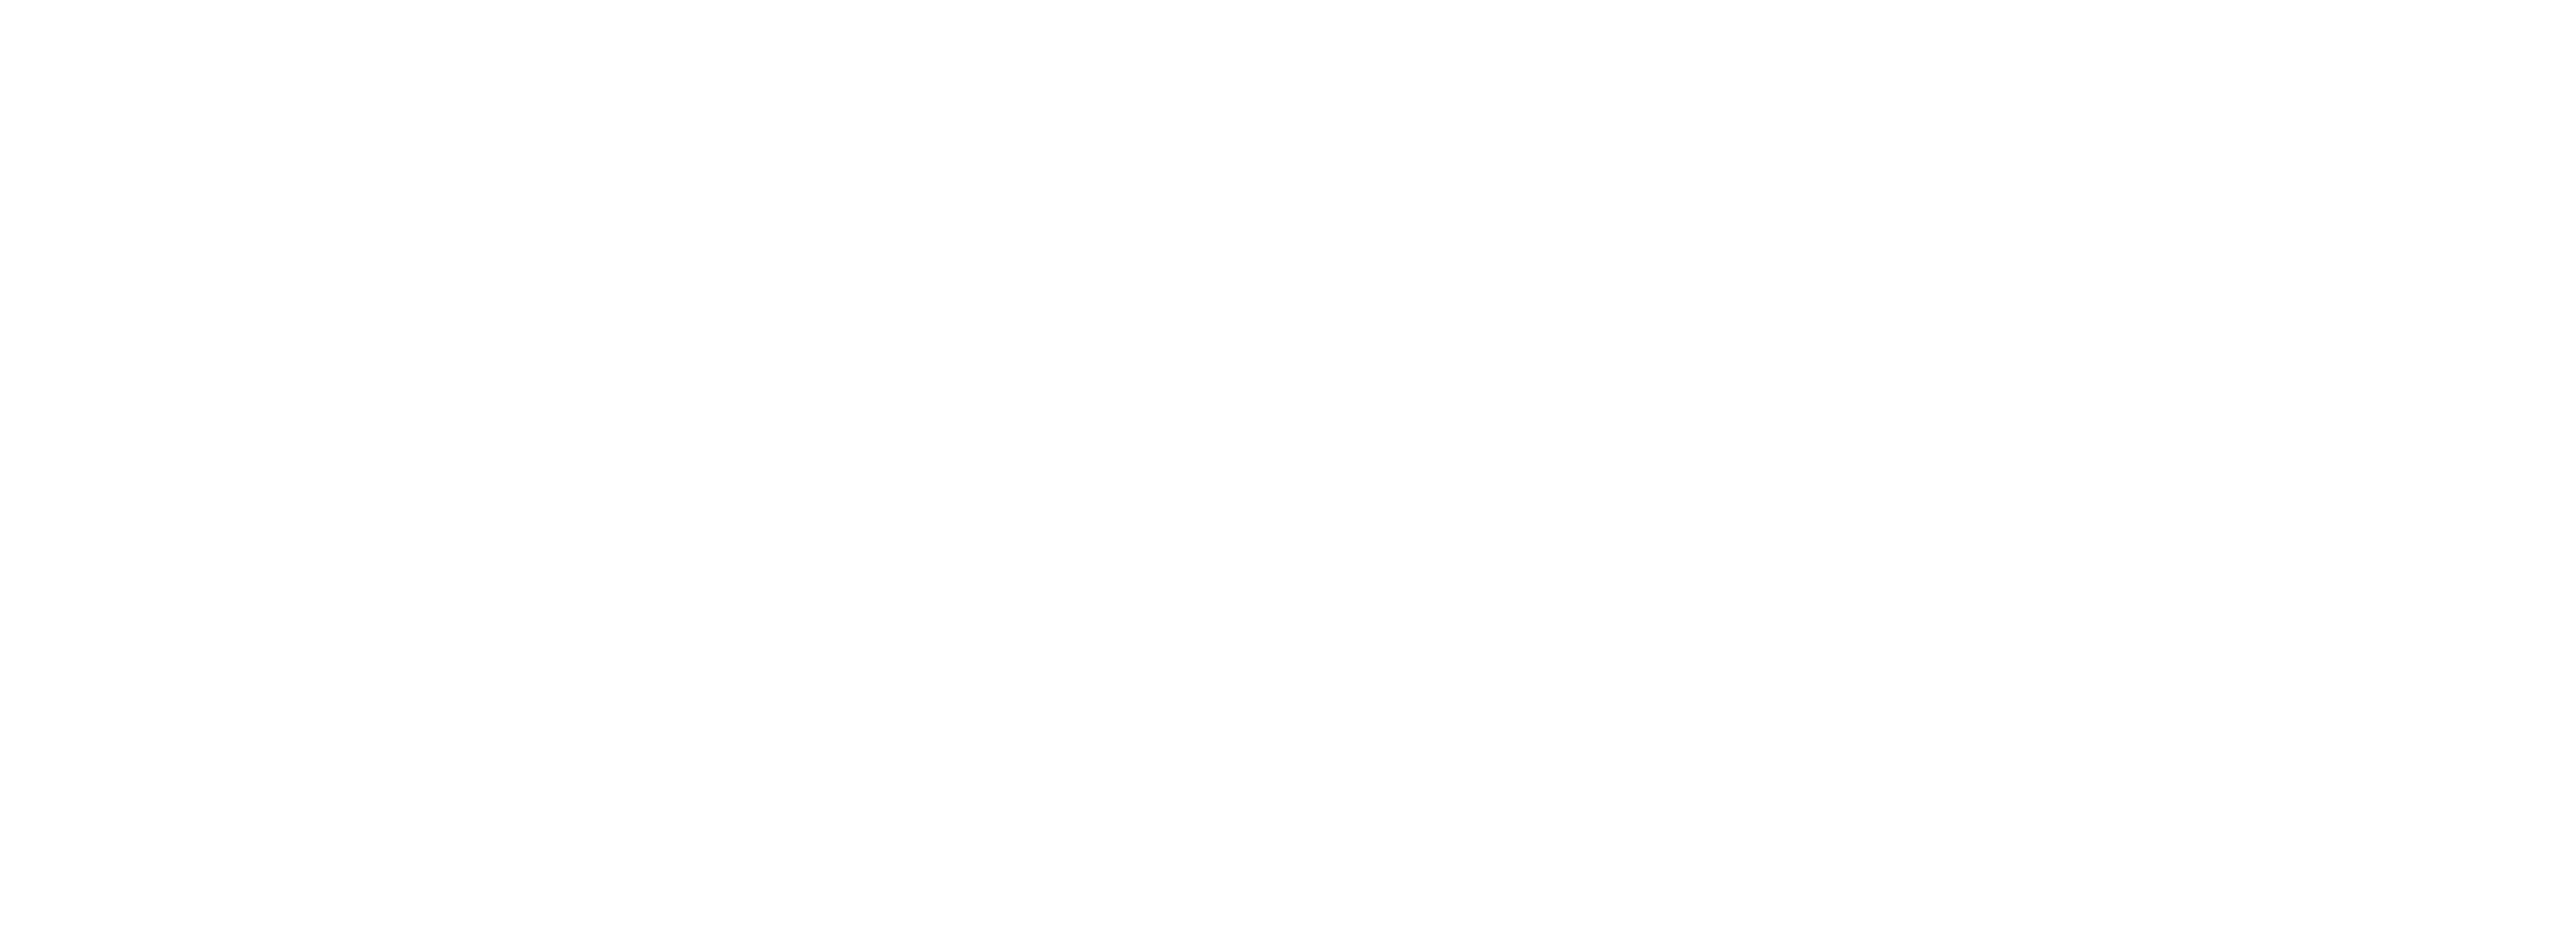 Lucidsound for jersey - White